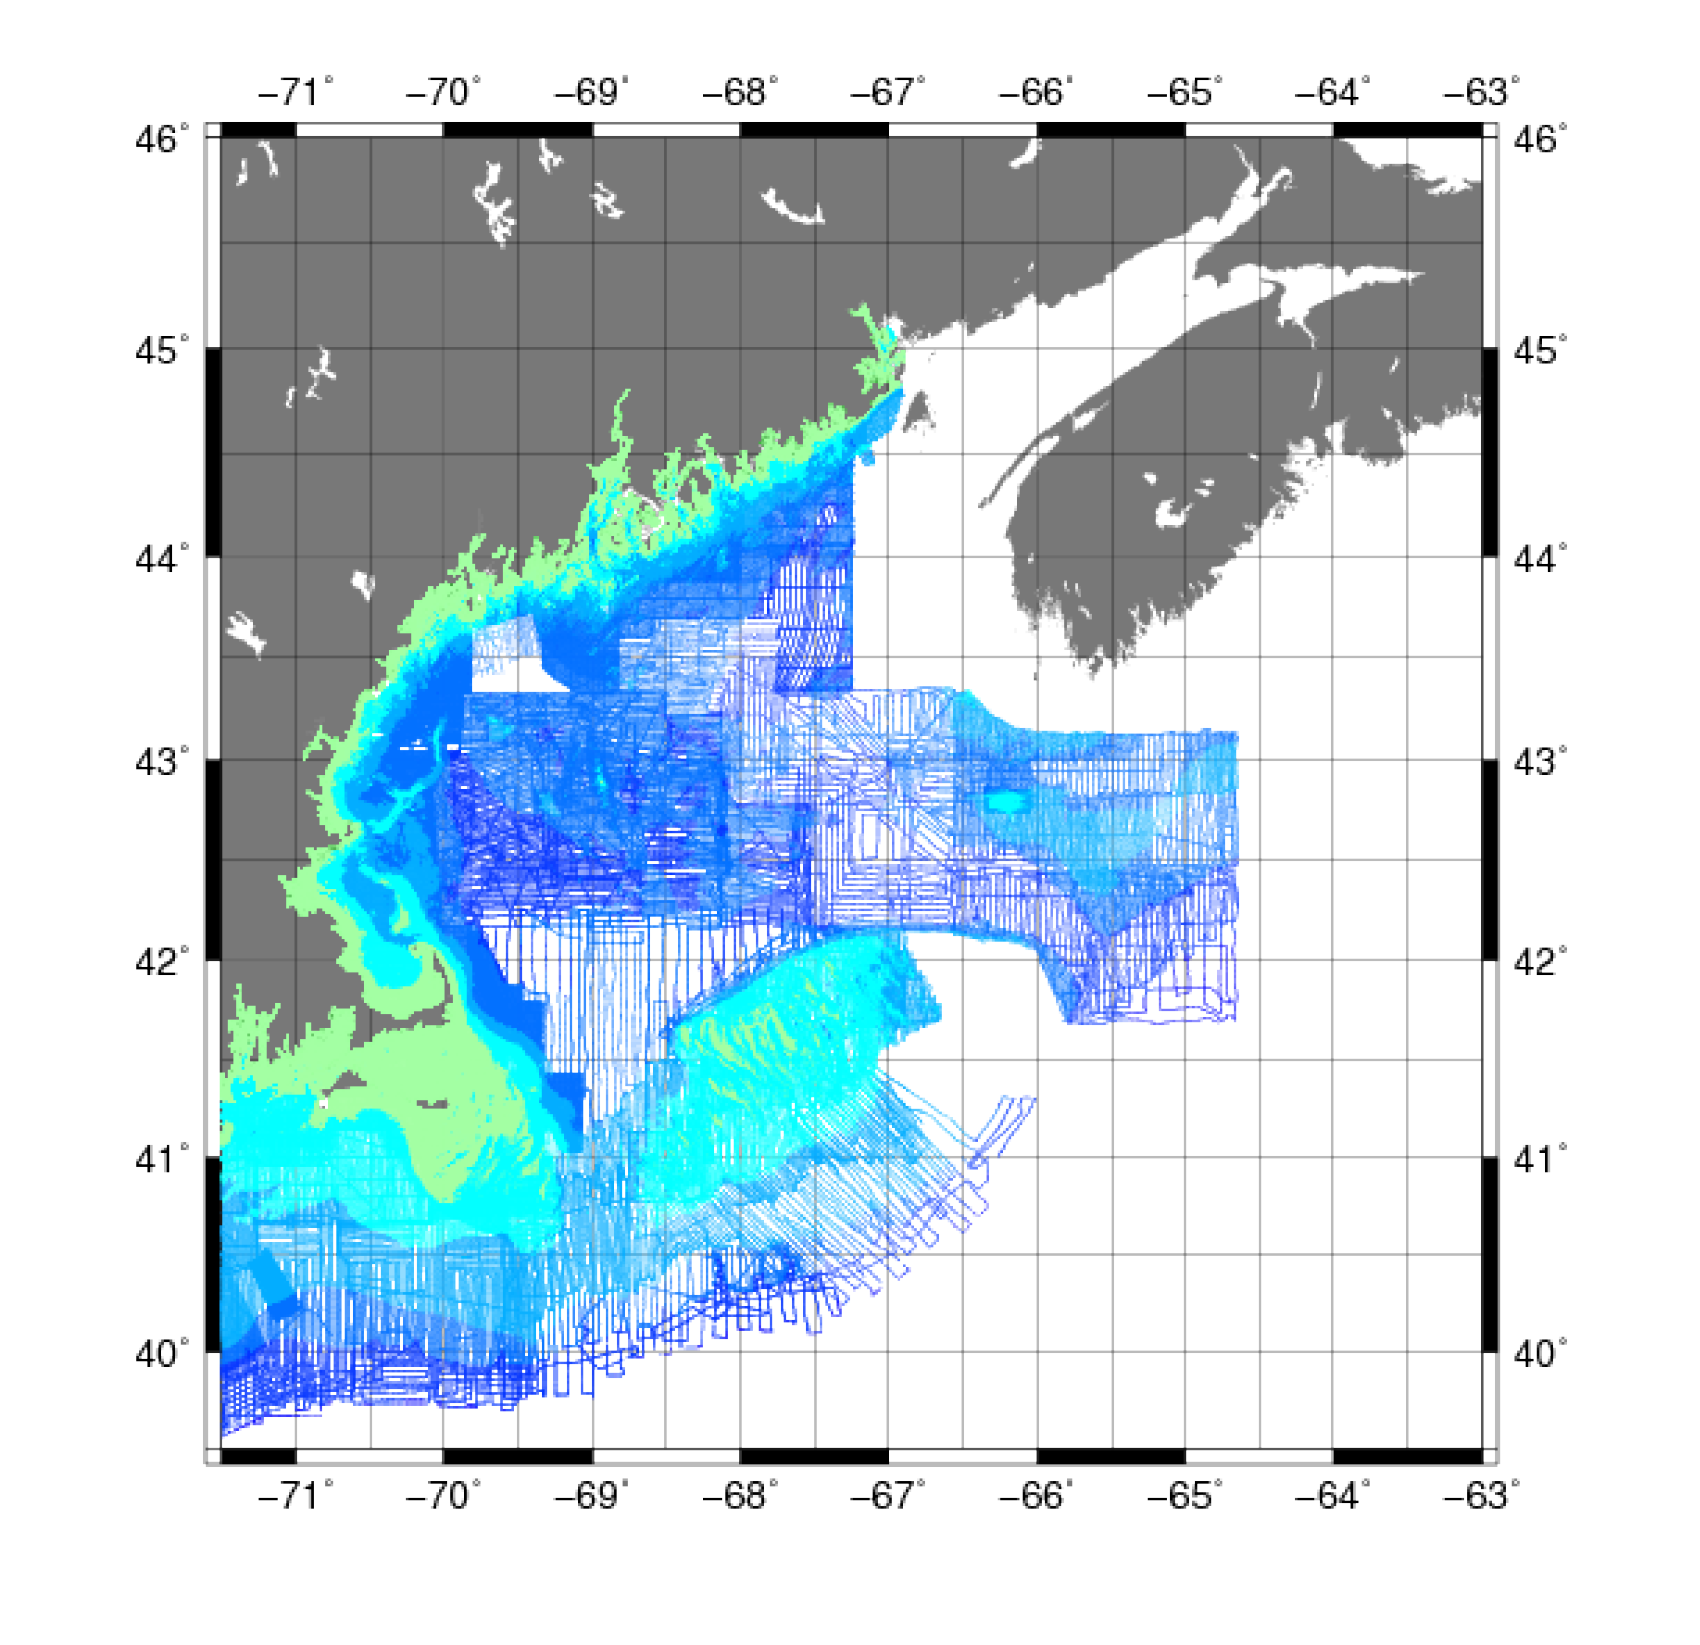 thumbnail image and link to larger image of a map showing hydrographic soundings